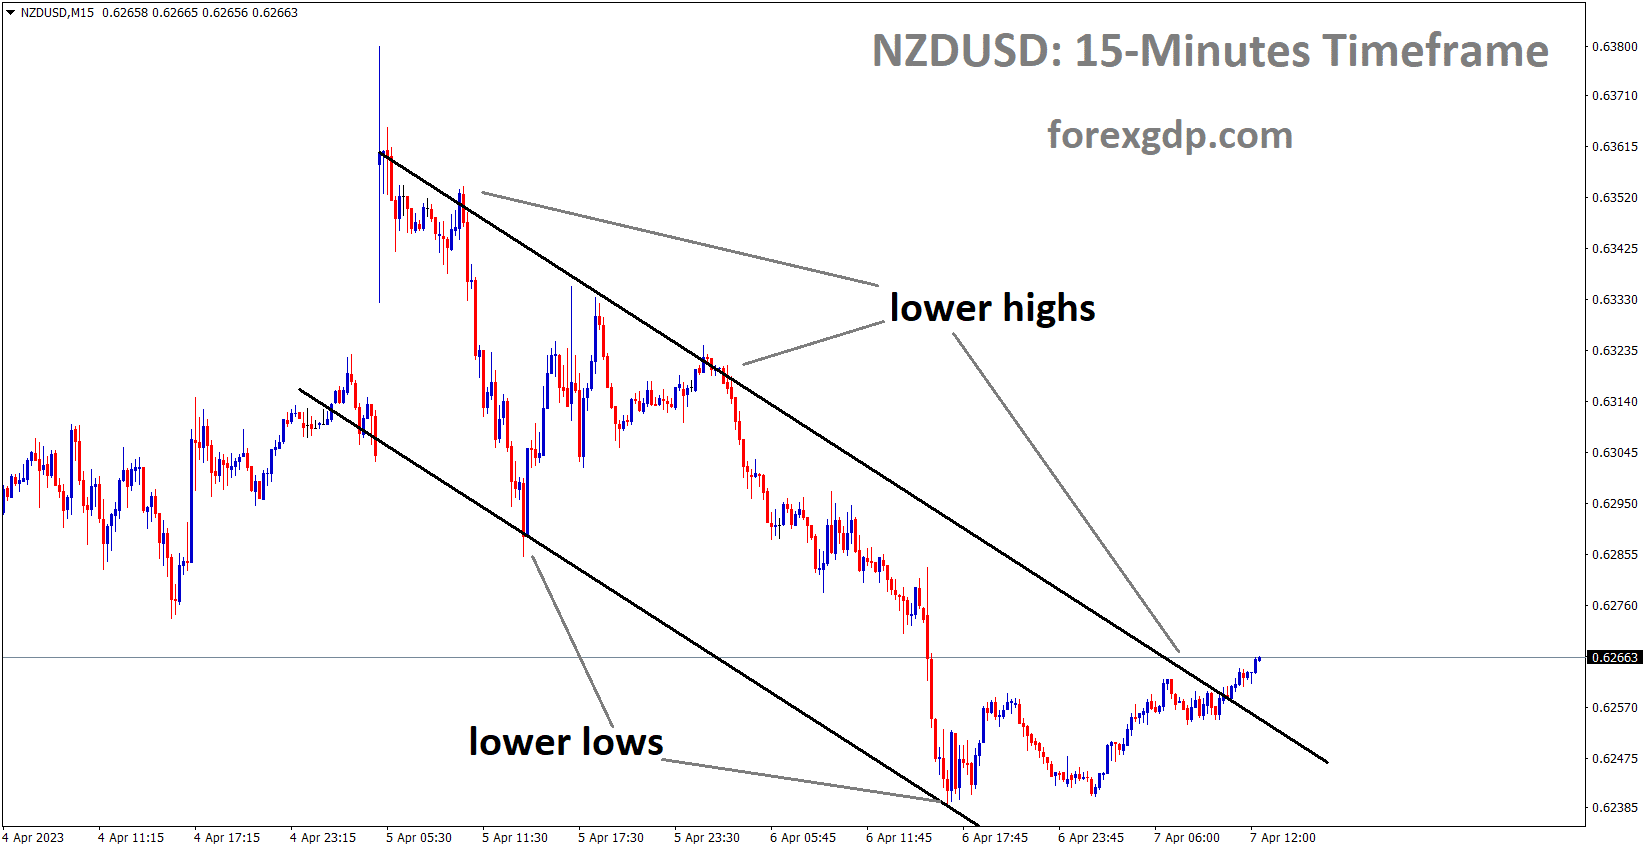 NZDUSD is moving in the Descending channel and the market has reached the lower high area of the channel